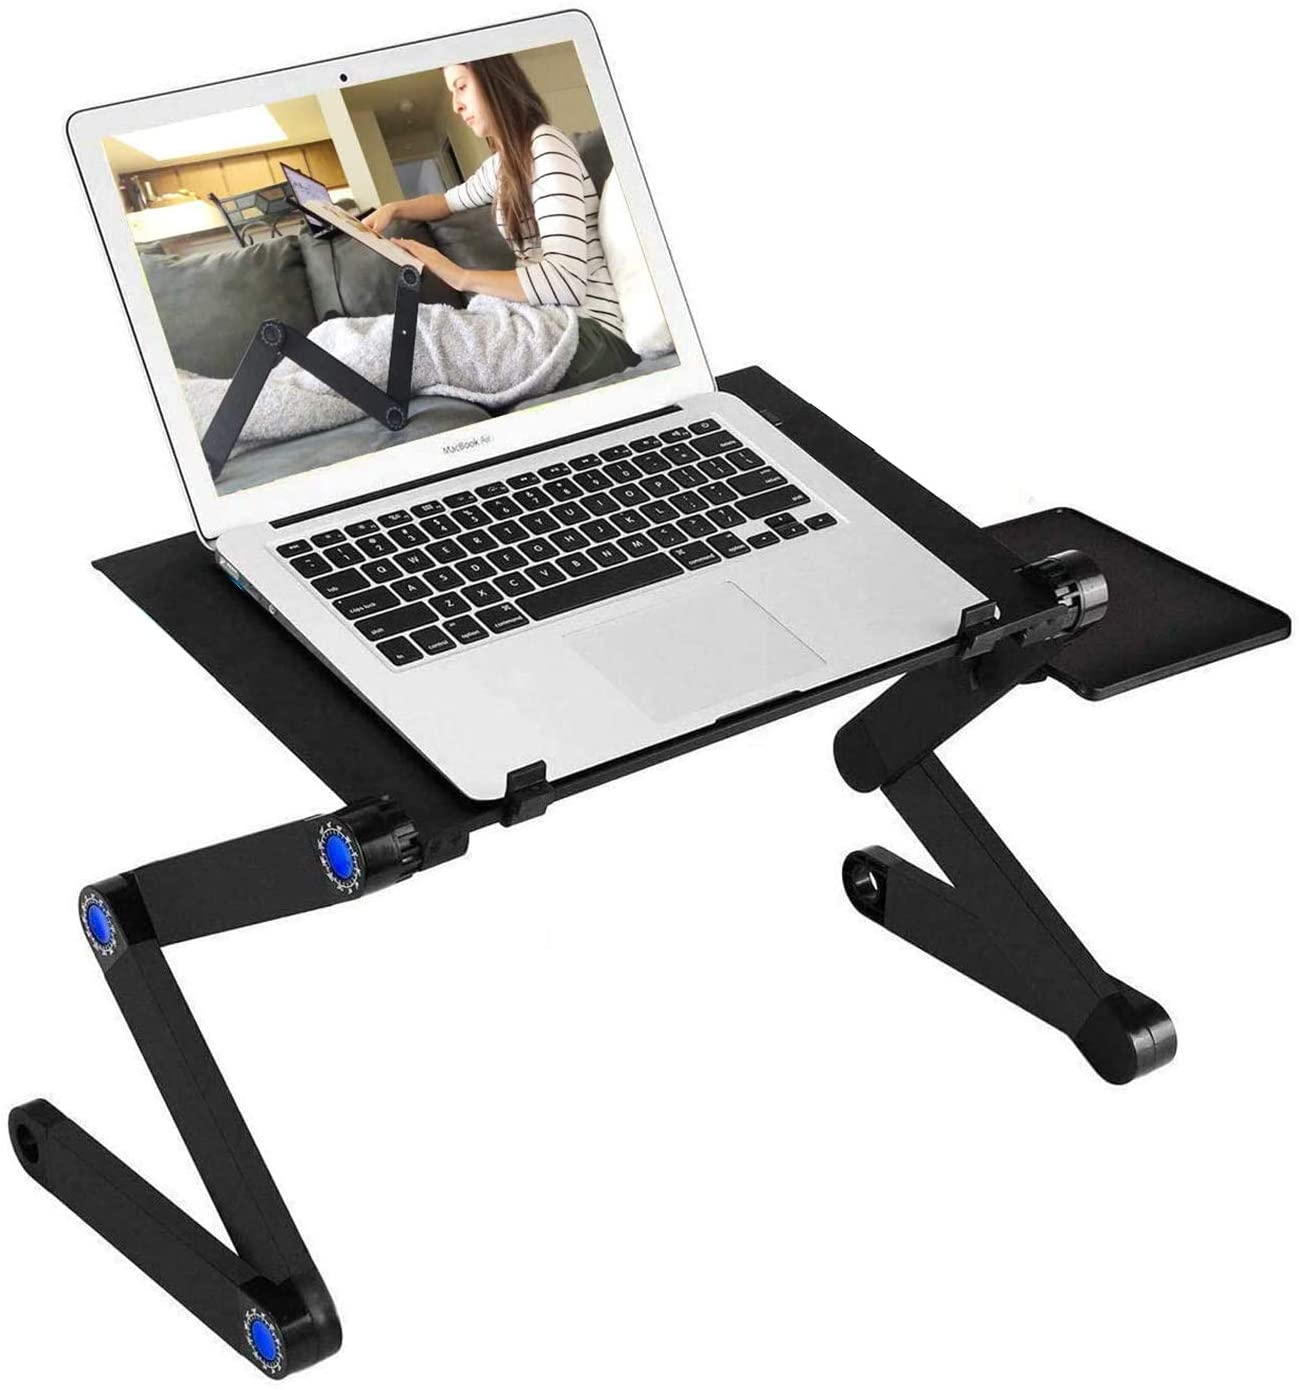 Adjustable Laptop Stand, RAINBEAN Laptop Desk with 2 CPU Cooling USB Fans for Bed Aluminum